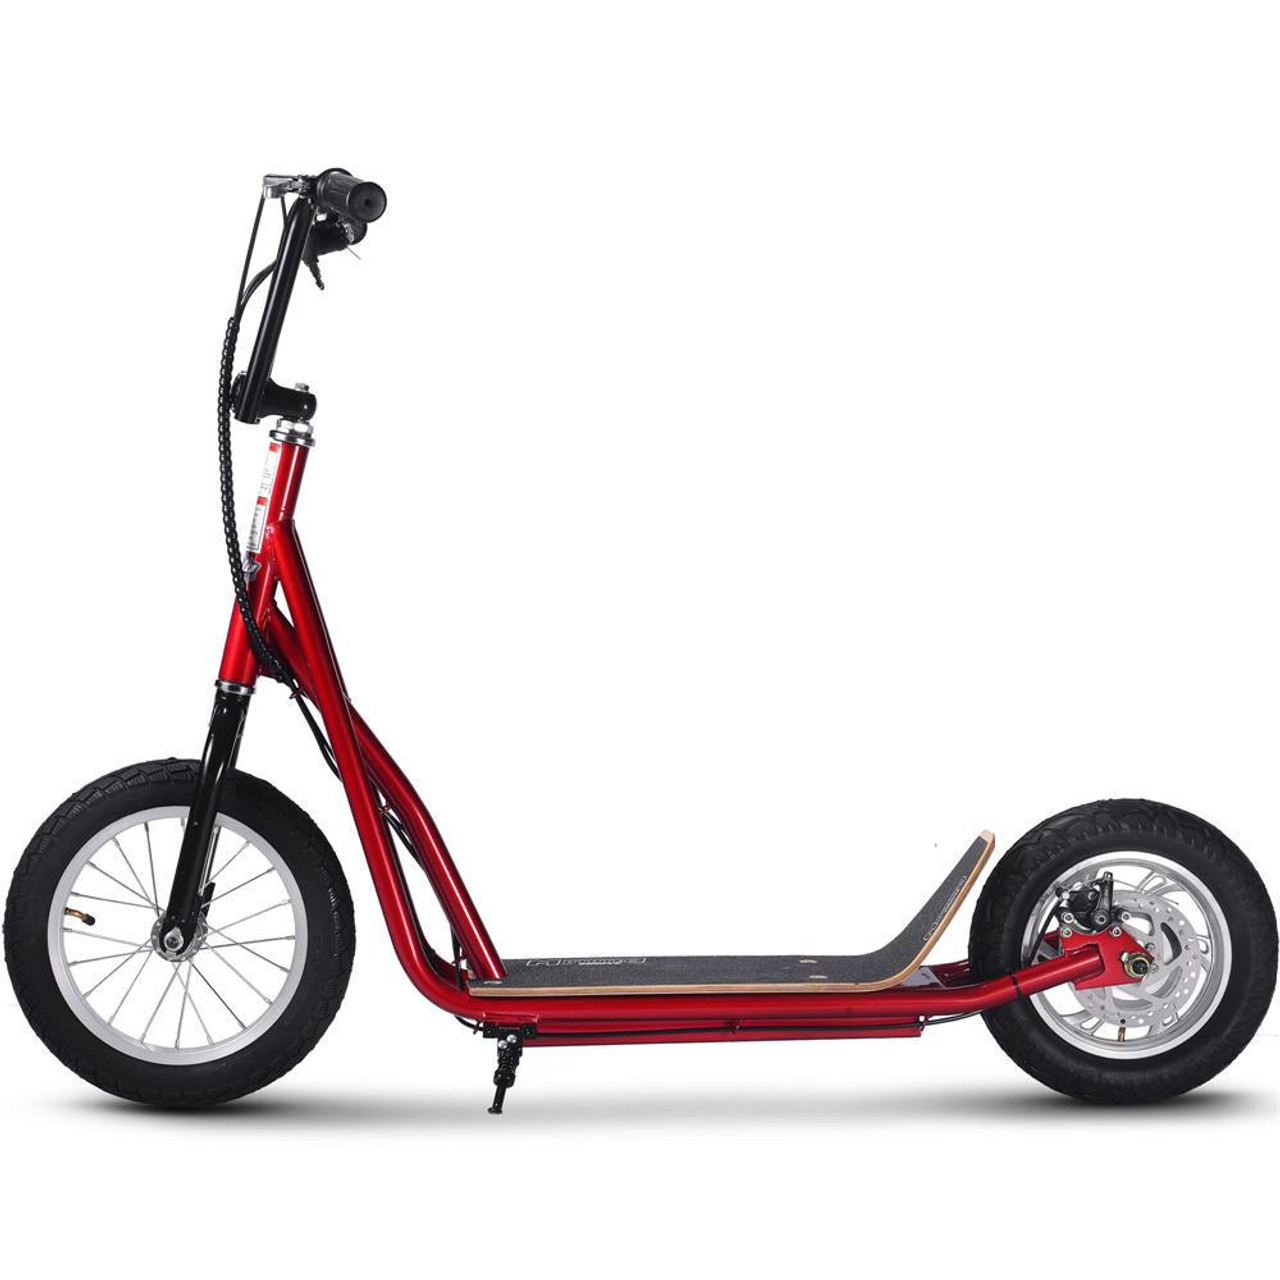  Mototec Groove 36v 350w Big Wheel Lithium Electric Scooter Red 